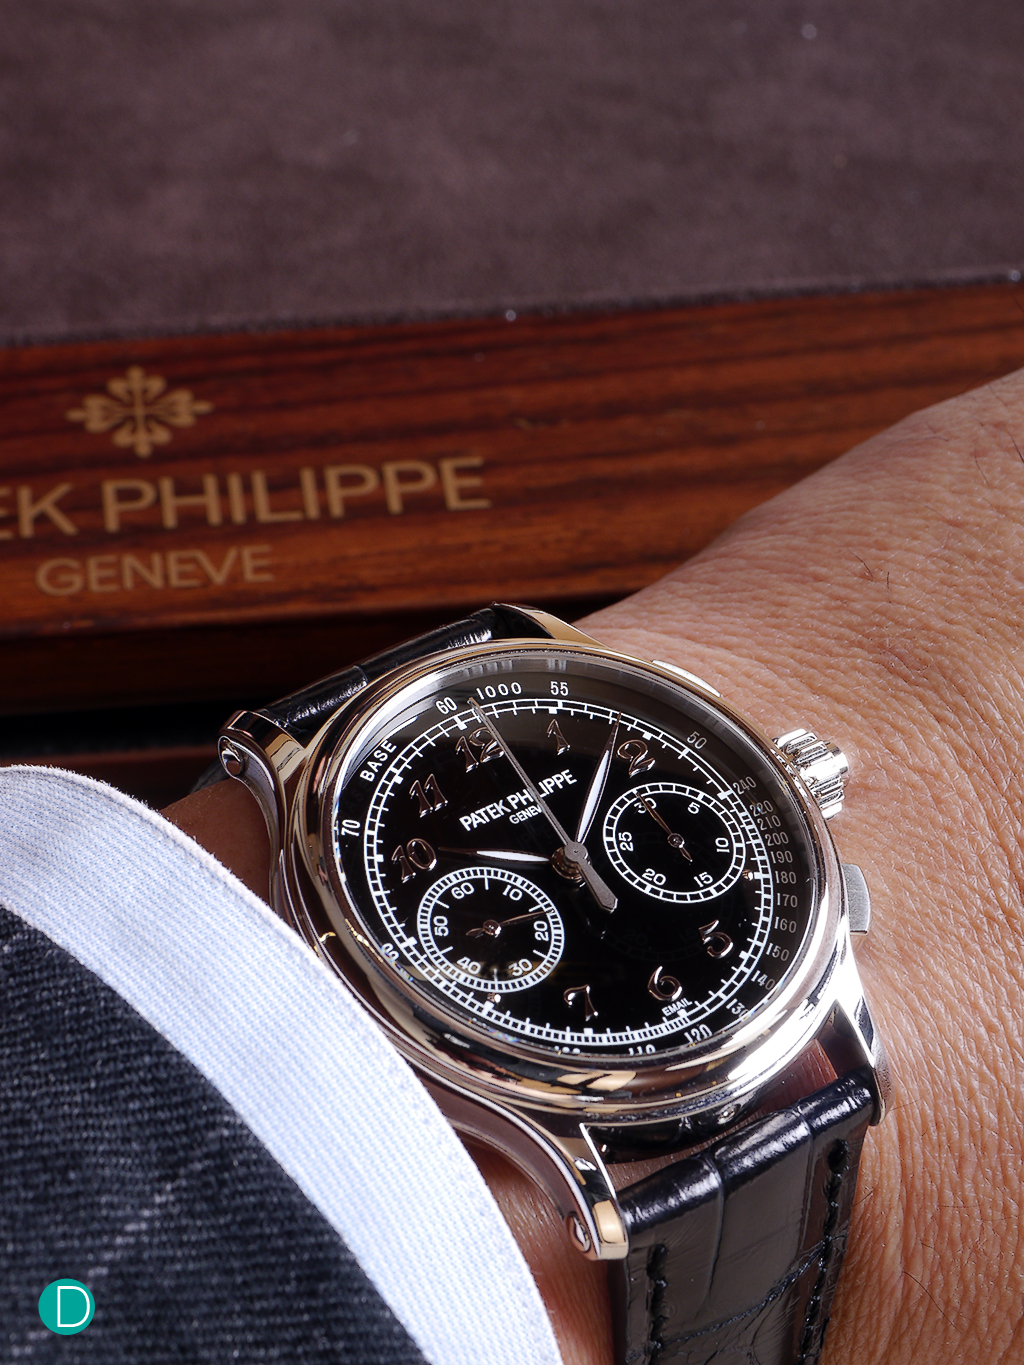 The Patek Philippe 5370 on the wrist. Case diameter is 41mm. Perfect on the wrist. 